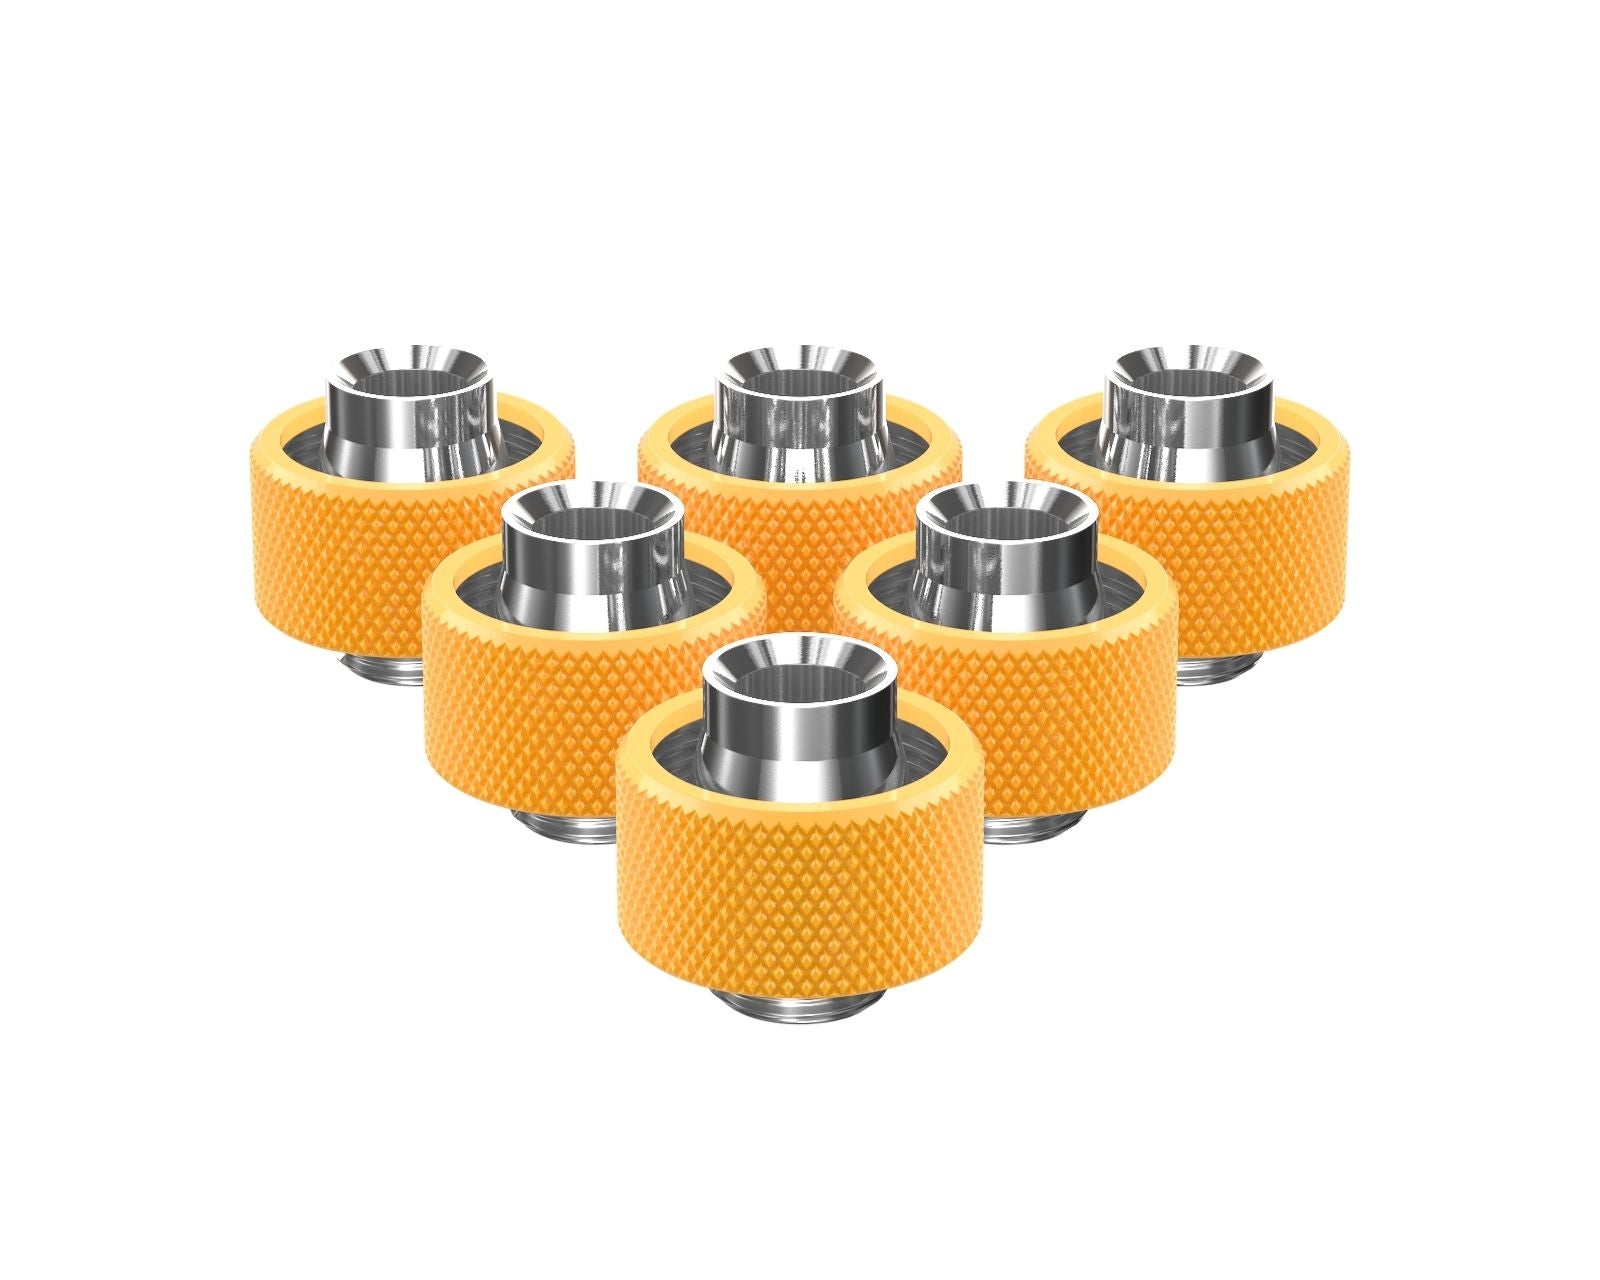 PrimoChill SecureFit SX - Premium Compression Fittings 6 Pack - For 1/2in ID x 3/4in OD Flexible Tubing (F-SFSX34-6) - Available in 20+ Colors, Custom Watercooling Loop Ready - Yellow